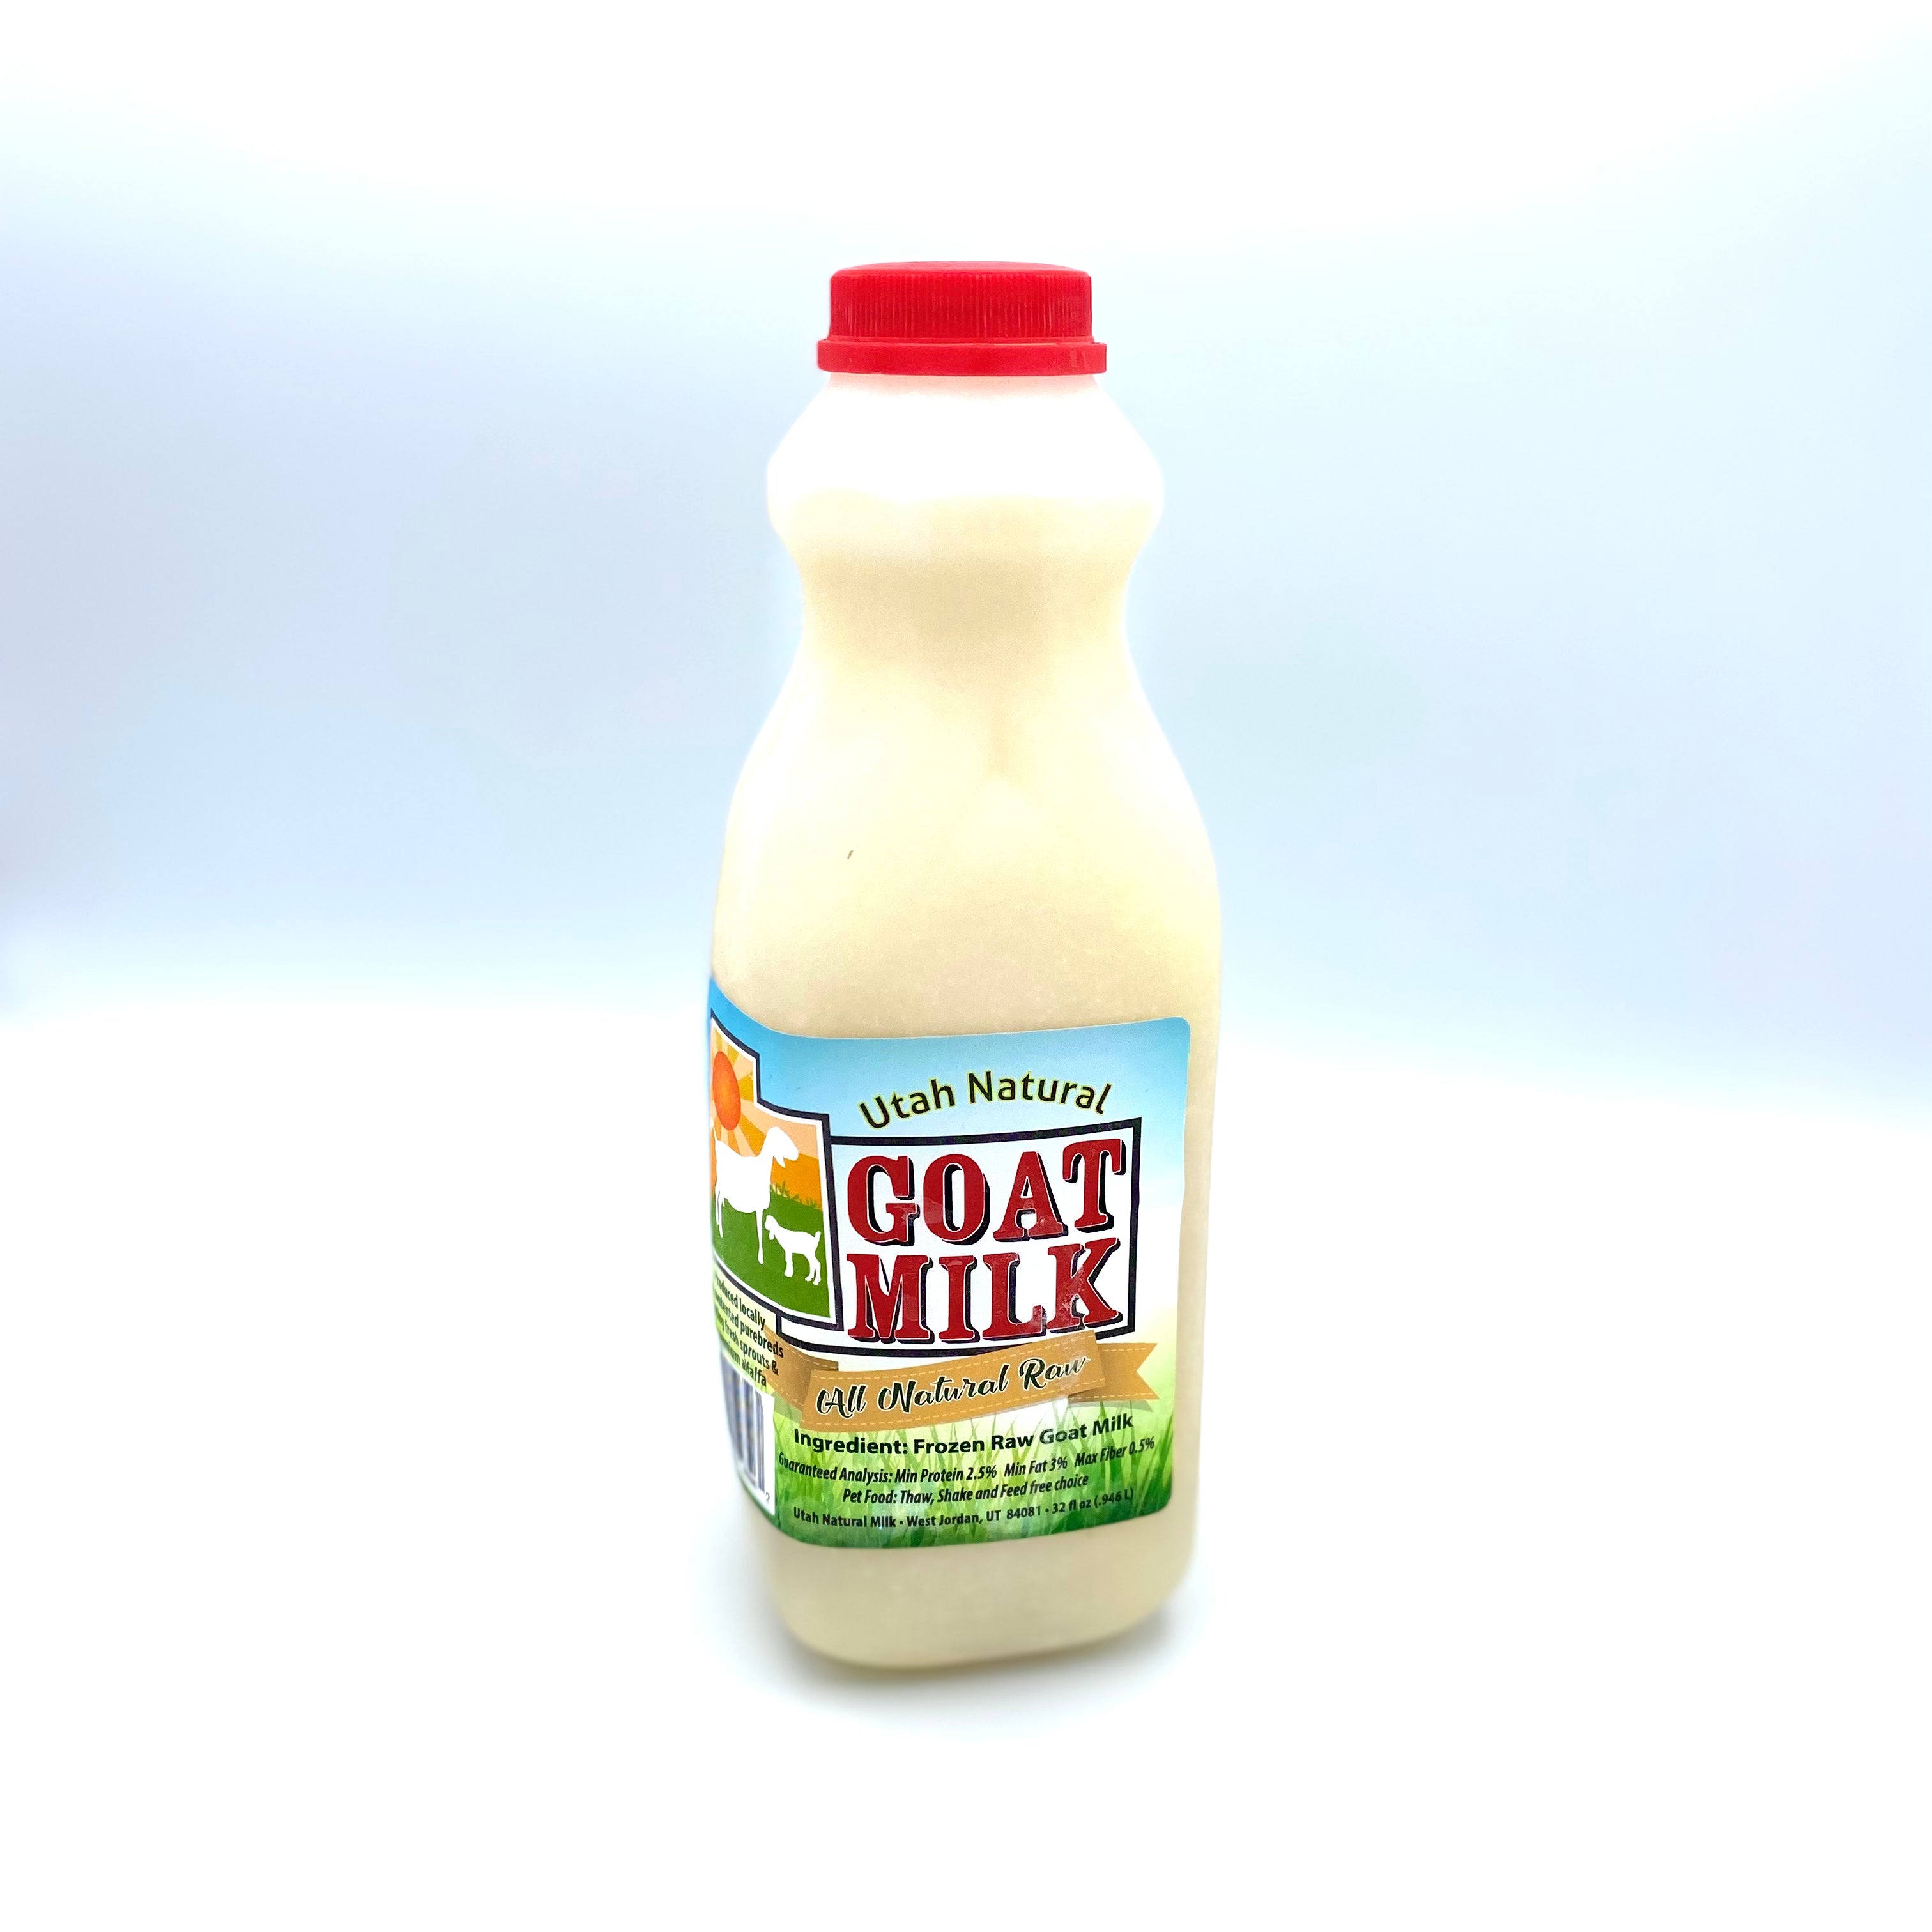 Refrigerated whole pasteurized organic goat milk 1l of Eternal Glow 4 U